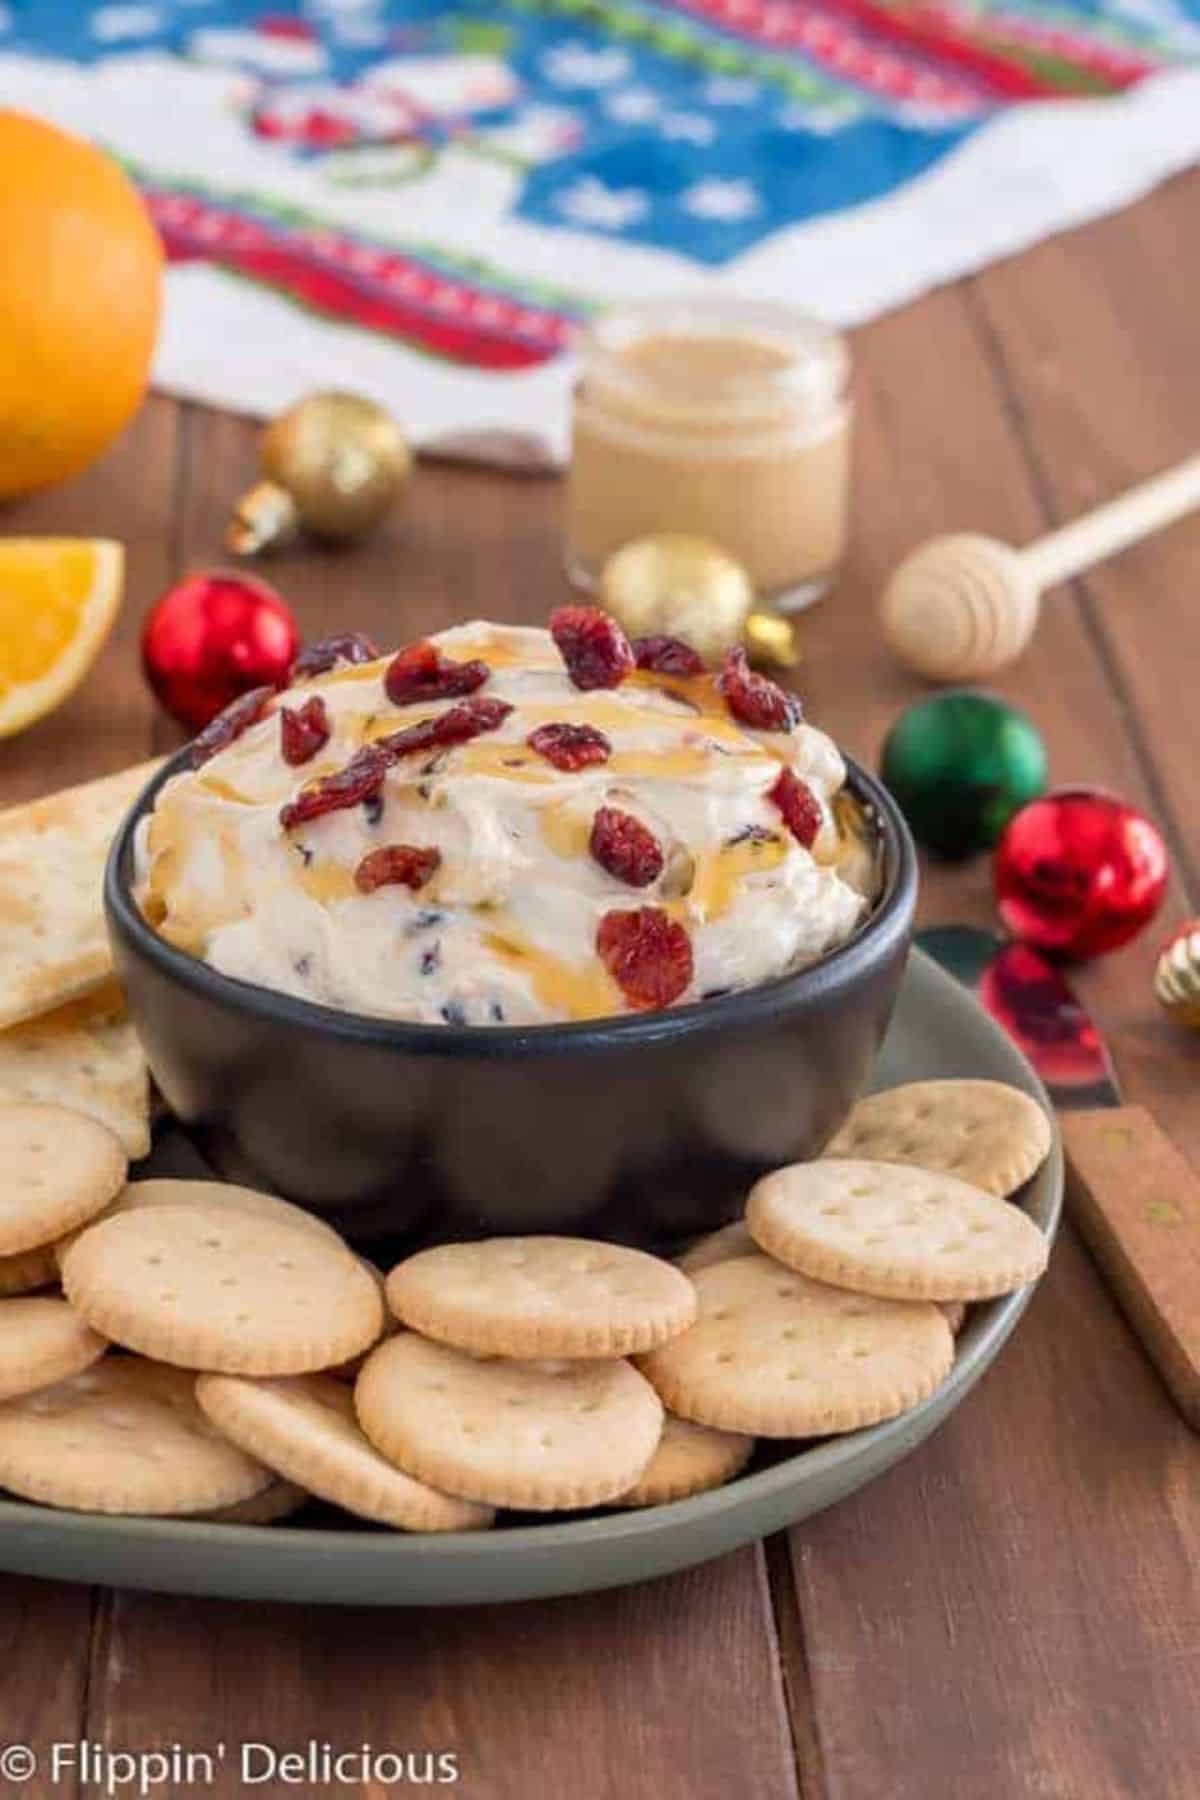 Cranberry Cream Cheese Dip in a black bowl on a tray with crackers.